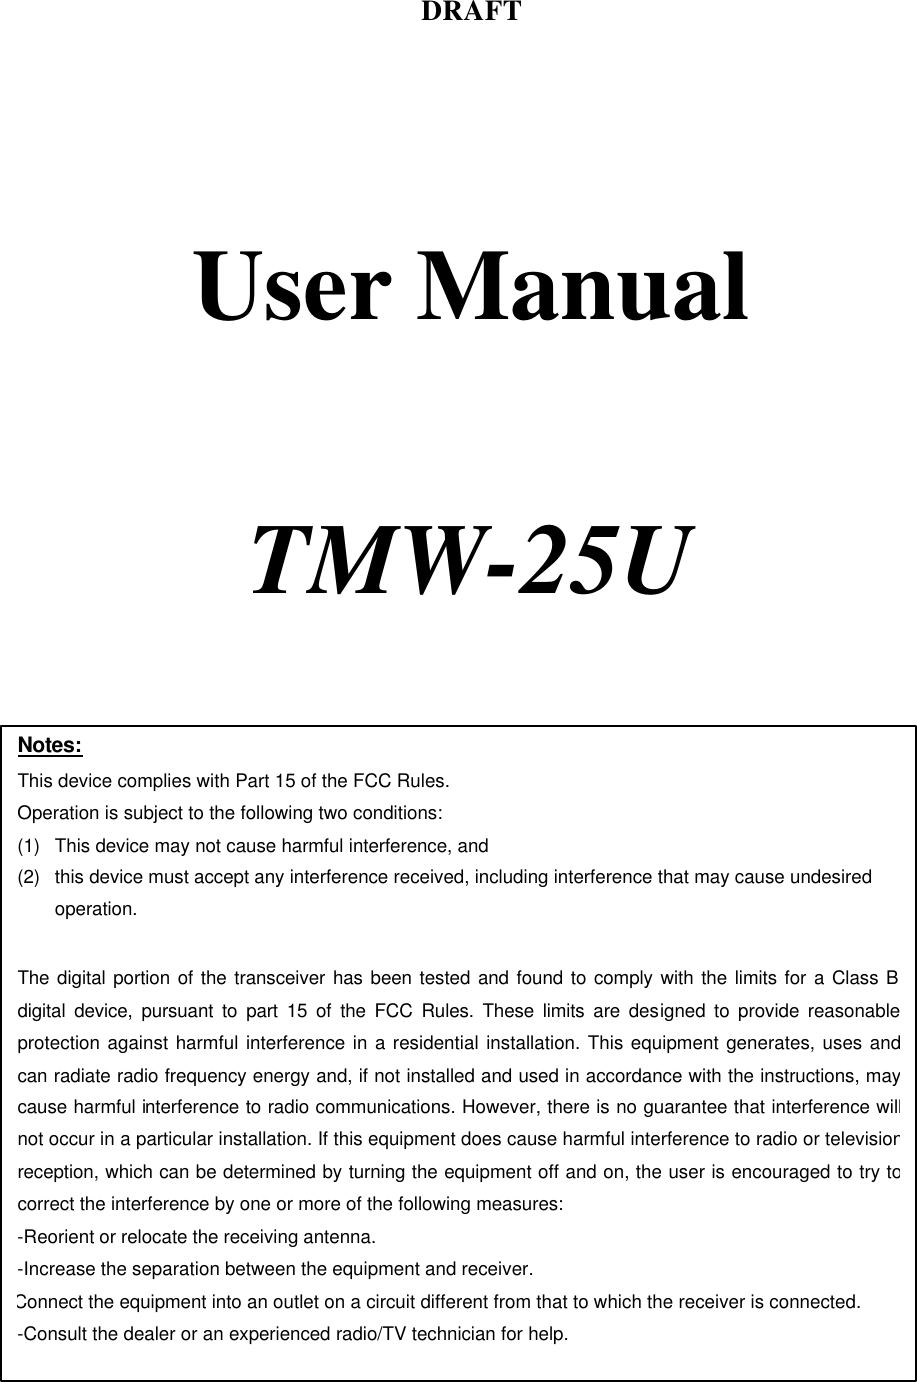 DRAFT     User Manual     TMW-25U    Notes: This device complies with Part 15 of the FCC Rules. Operation is subject to the following two conditions: (1) This device may not cause harmful interference, and (2) this device must accept any interference received, including interference that may cause undesired operation.  The digital portion of the transceiver has been tested and found to comply with the limits for a Class B digital device, pursuant to part 15 of the FCC Rules. These limits are designed to provide reasonable protection against harmful interference in a residential installation. This equipment generates, uses and can radiate radio frequency energy and, if not installed and used in accordance with the instructions, may cause harmful interference to radio communications. However, there is no guarantee that interference will not occur in a particular installation. If this equipment does cause harmful interference to radio or television reception, which can be determined by turning the equipment off and on, the user is encouraged to try to correct the interference by one or more of the following measures:  -Reorient or relocate the receiving antenna. -Increase the separation between the equipment and receiver. Connect the equipment into an outlet on a circuit different from that to which the receiver is connected. -Consult the dealer or an experienced radio/TV technician for help.  